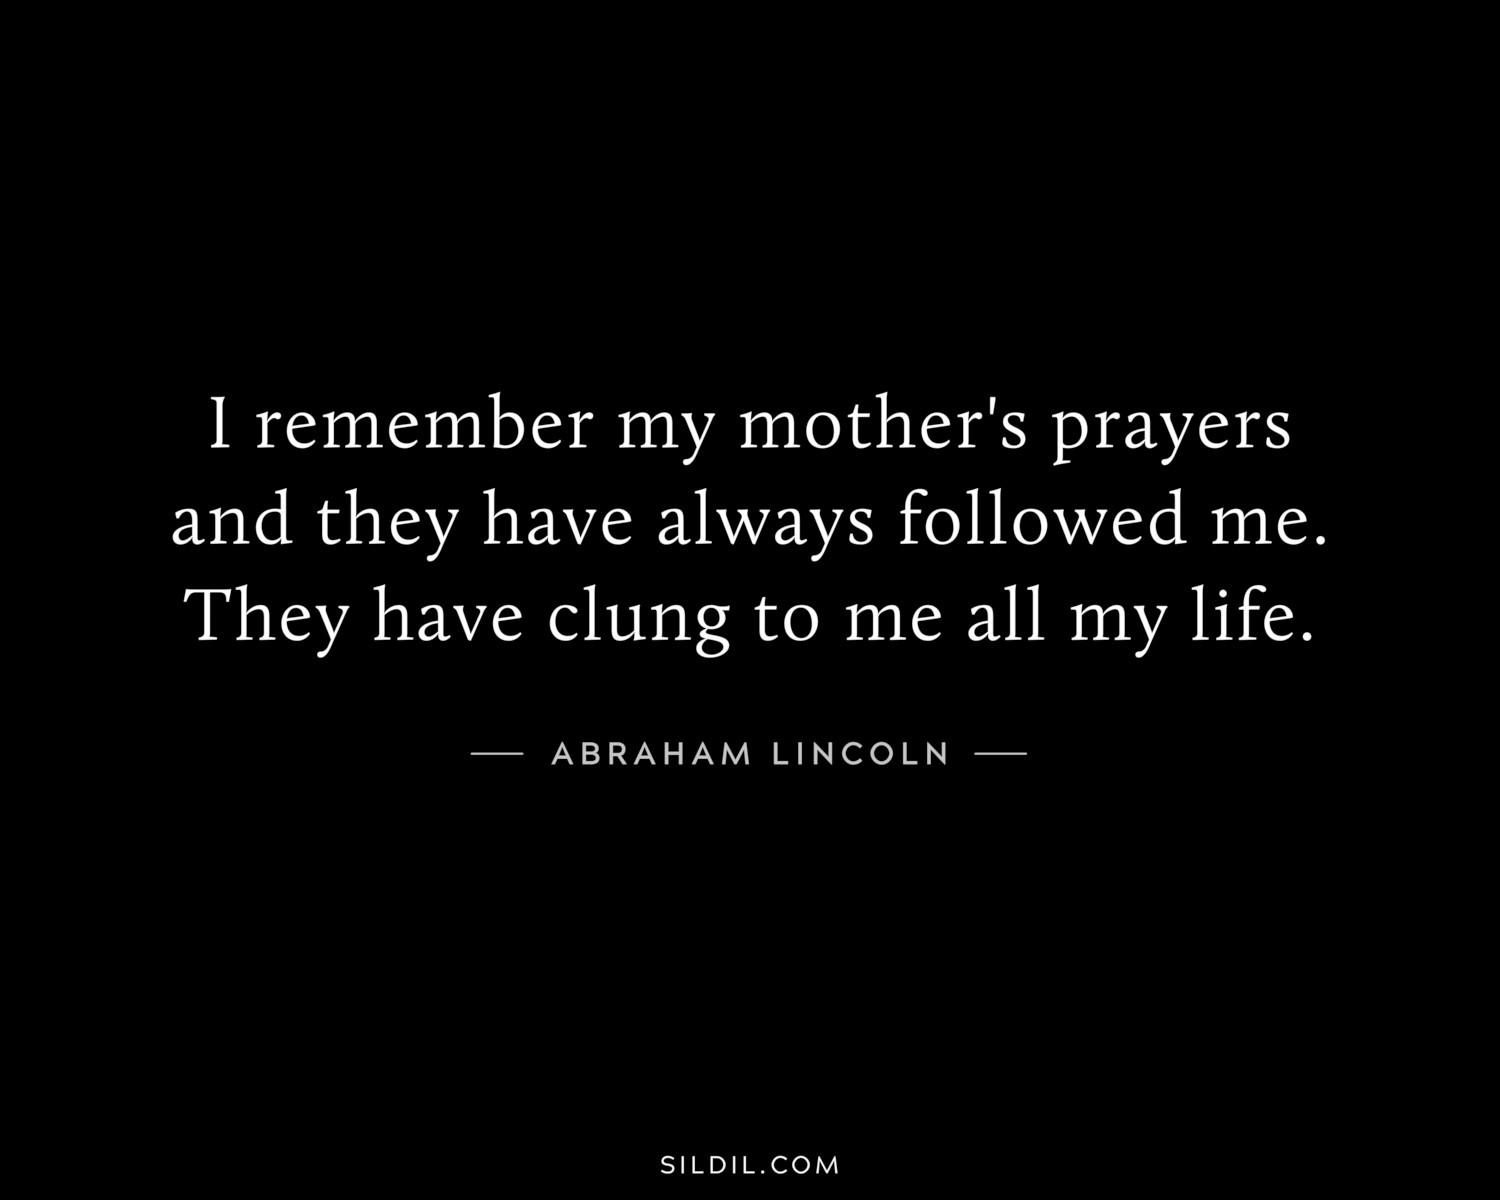 I remember my mother's prayers and they have always followed me. They have clung to me all my life.